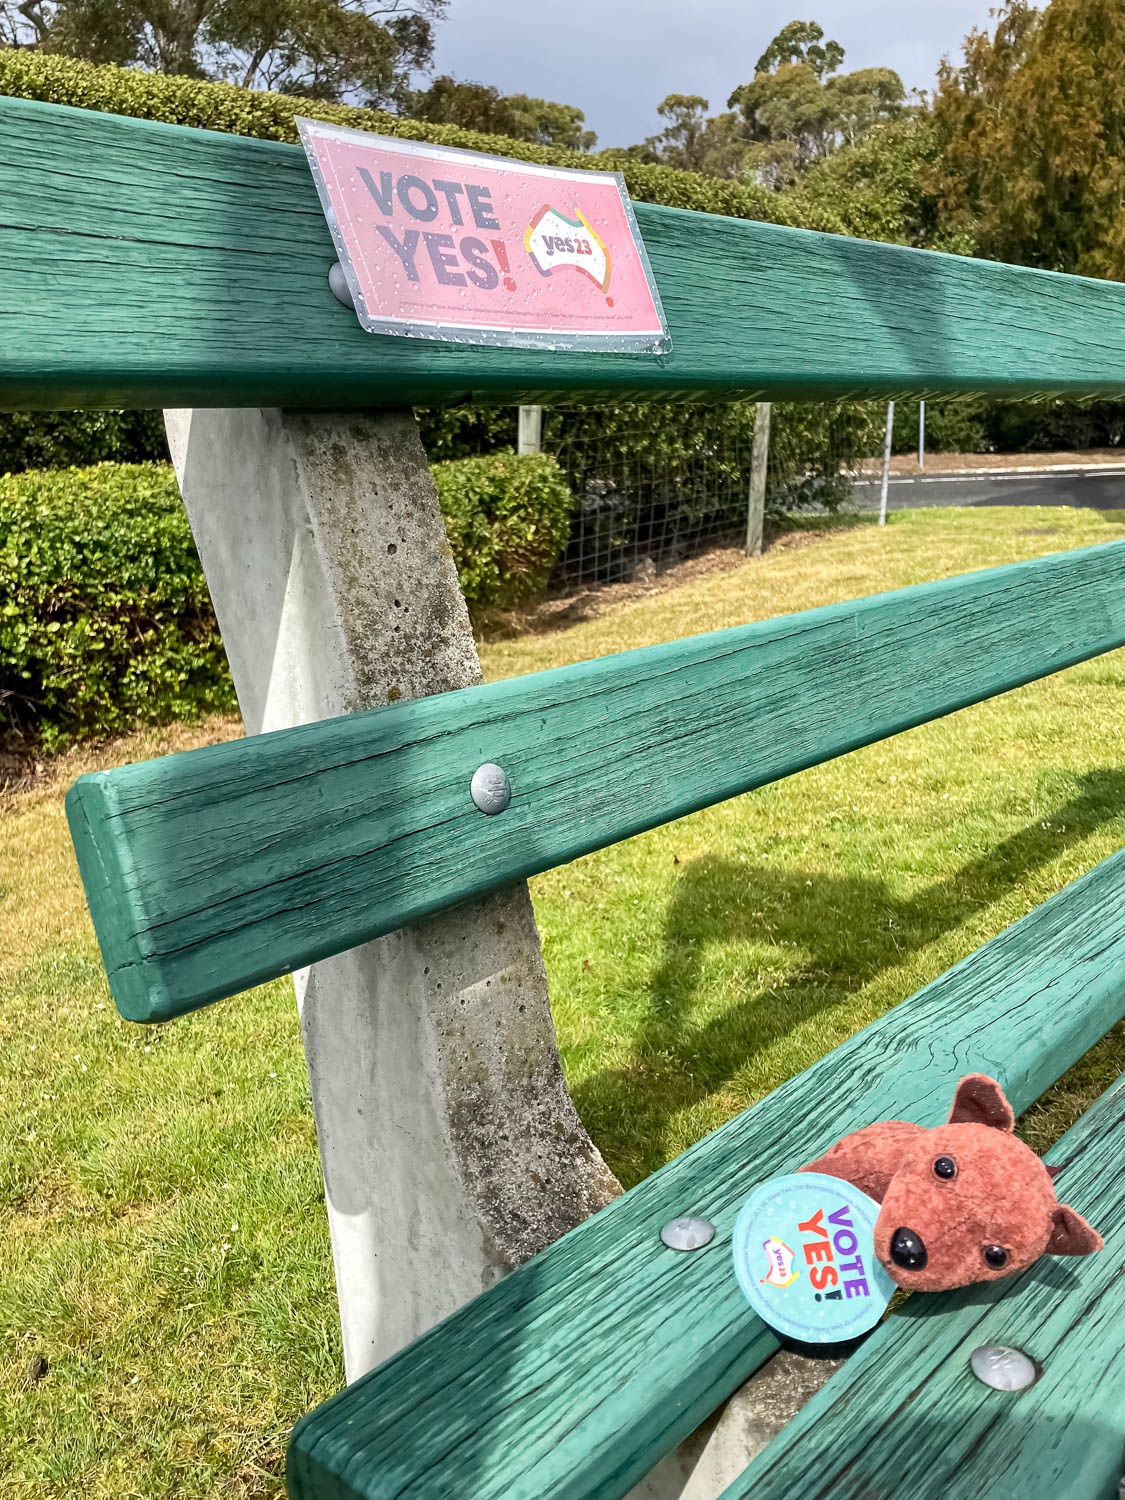 A green bench with a pink "Vote Yes" sticker and a small teddy bear with a "Vote Yes" sign around its neck